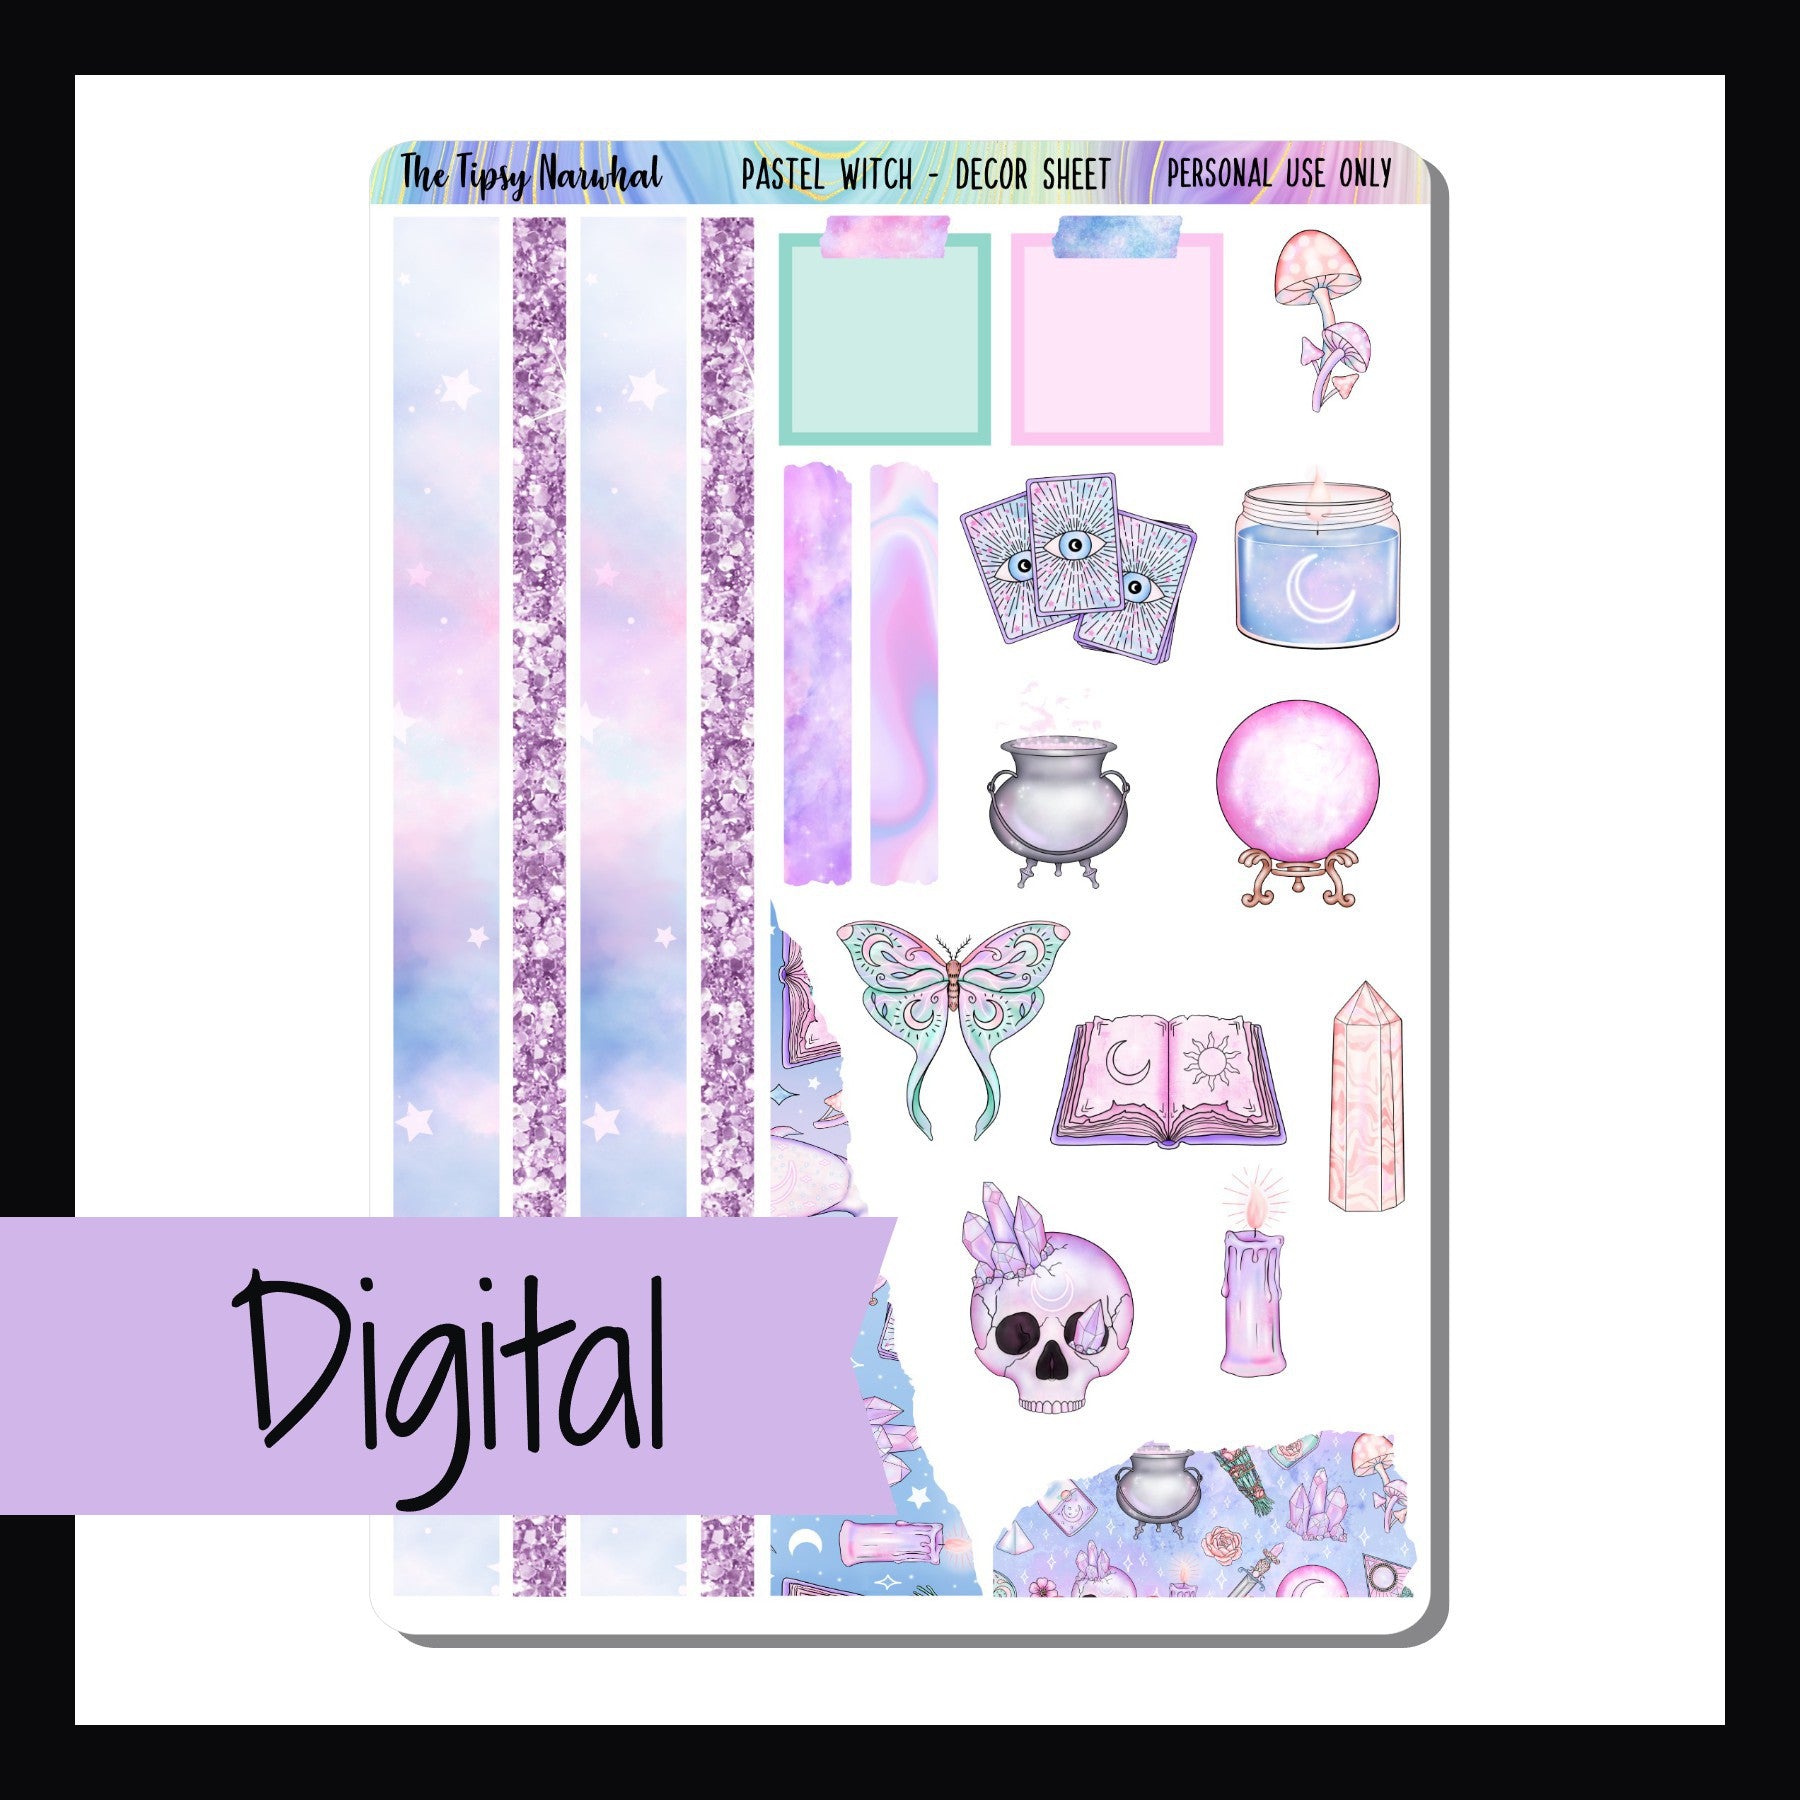 Digital Pastel Witch Decor Sheet is a digital/printable version of the Pastel Witch decor sheet.  This sheet features multiple decor elements all which match the Pastel Witch kits.